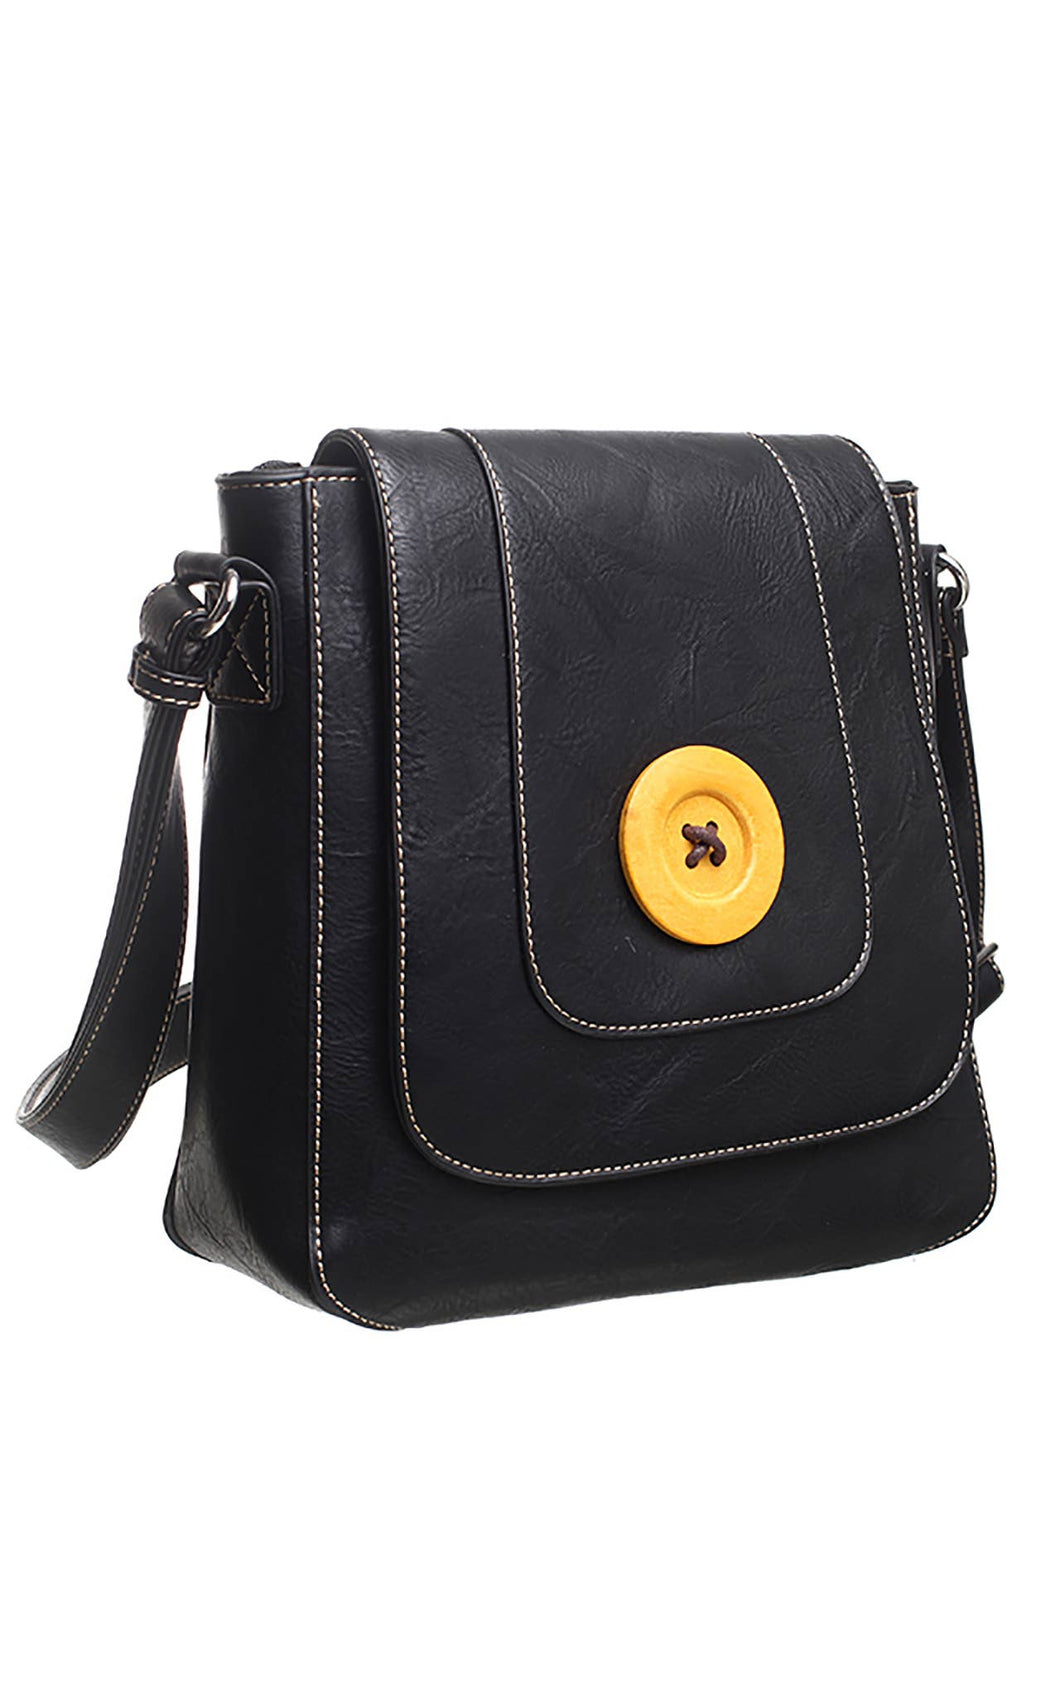 CLASSIC FLAP OVER WOODEN BUTTON CROSS BODY BAG BLACK